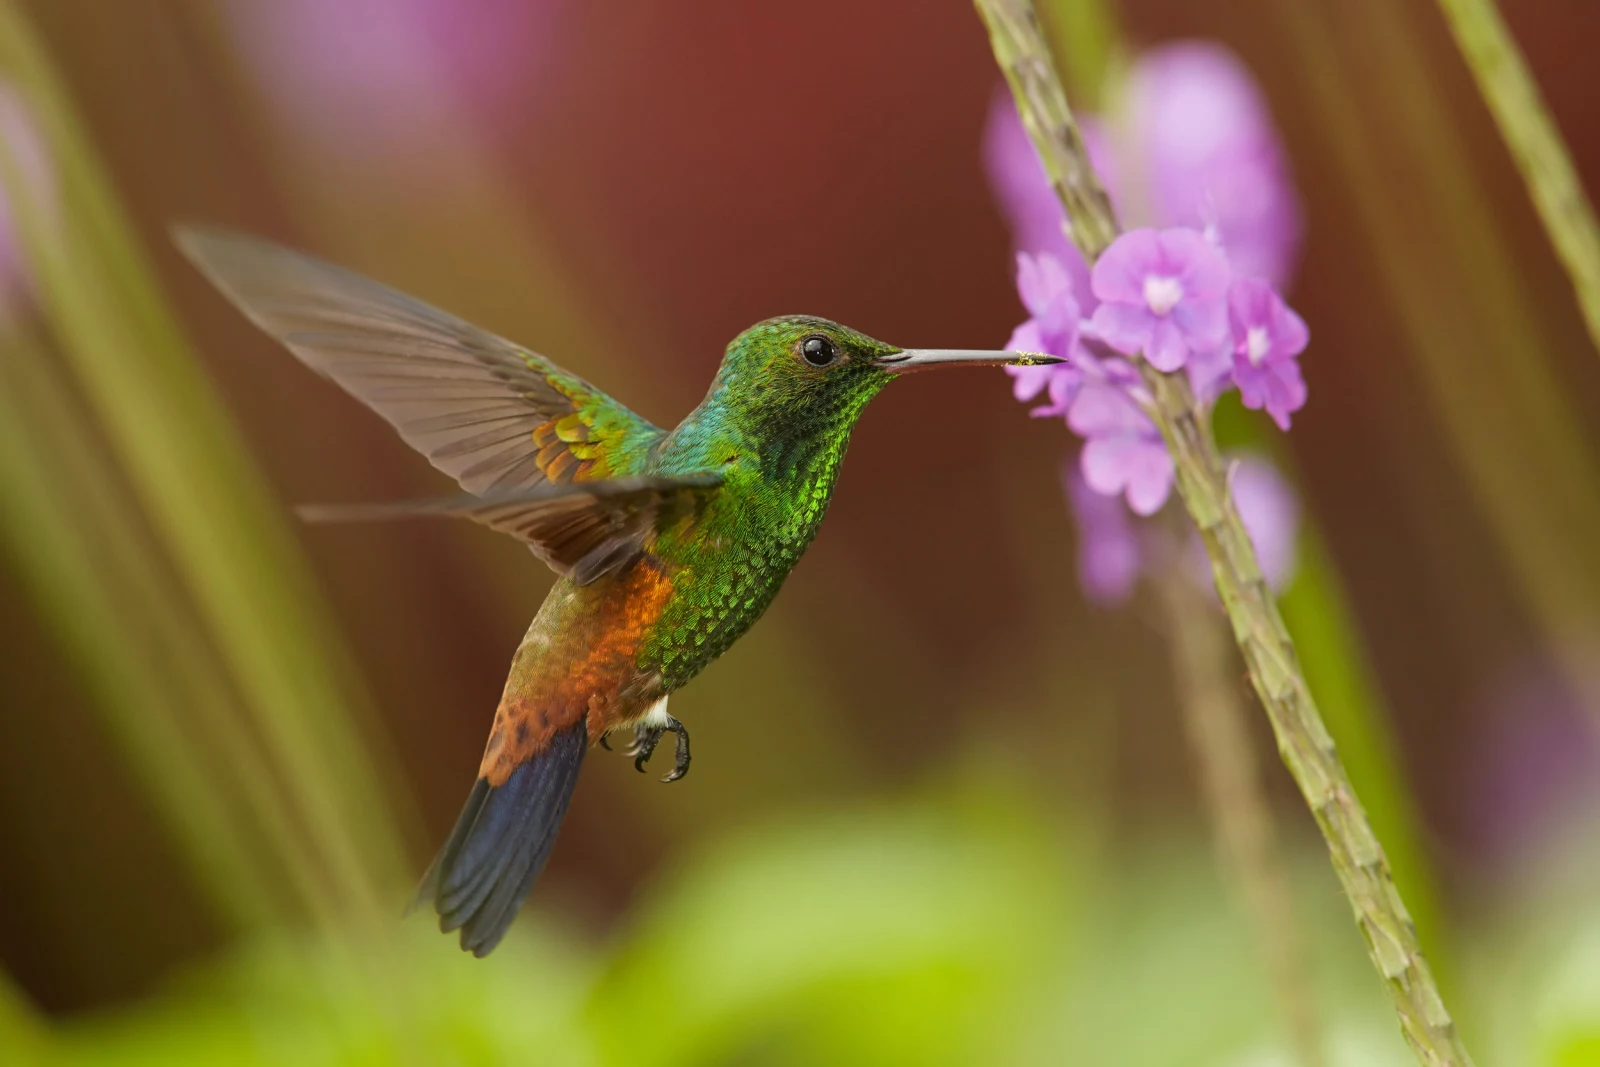 hummingbird attracted by a purple flower